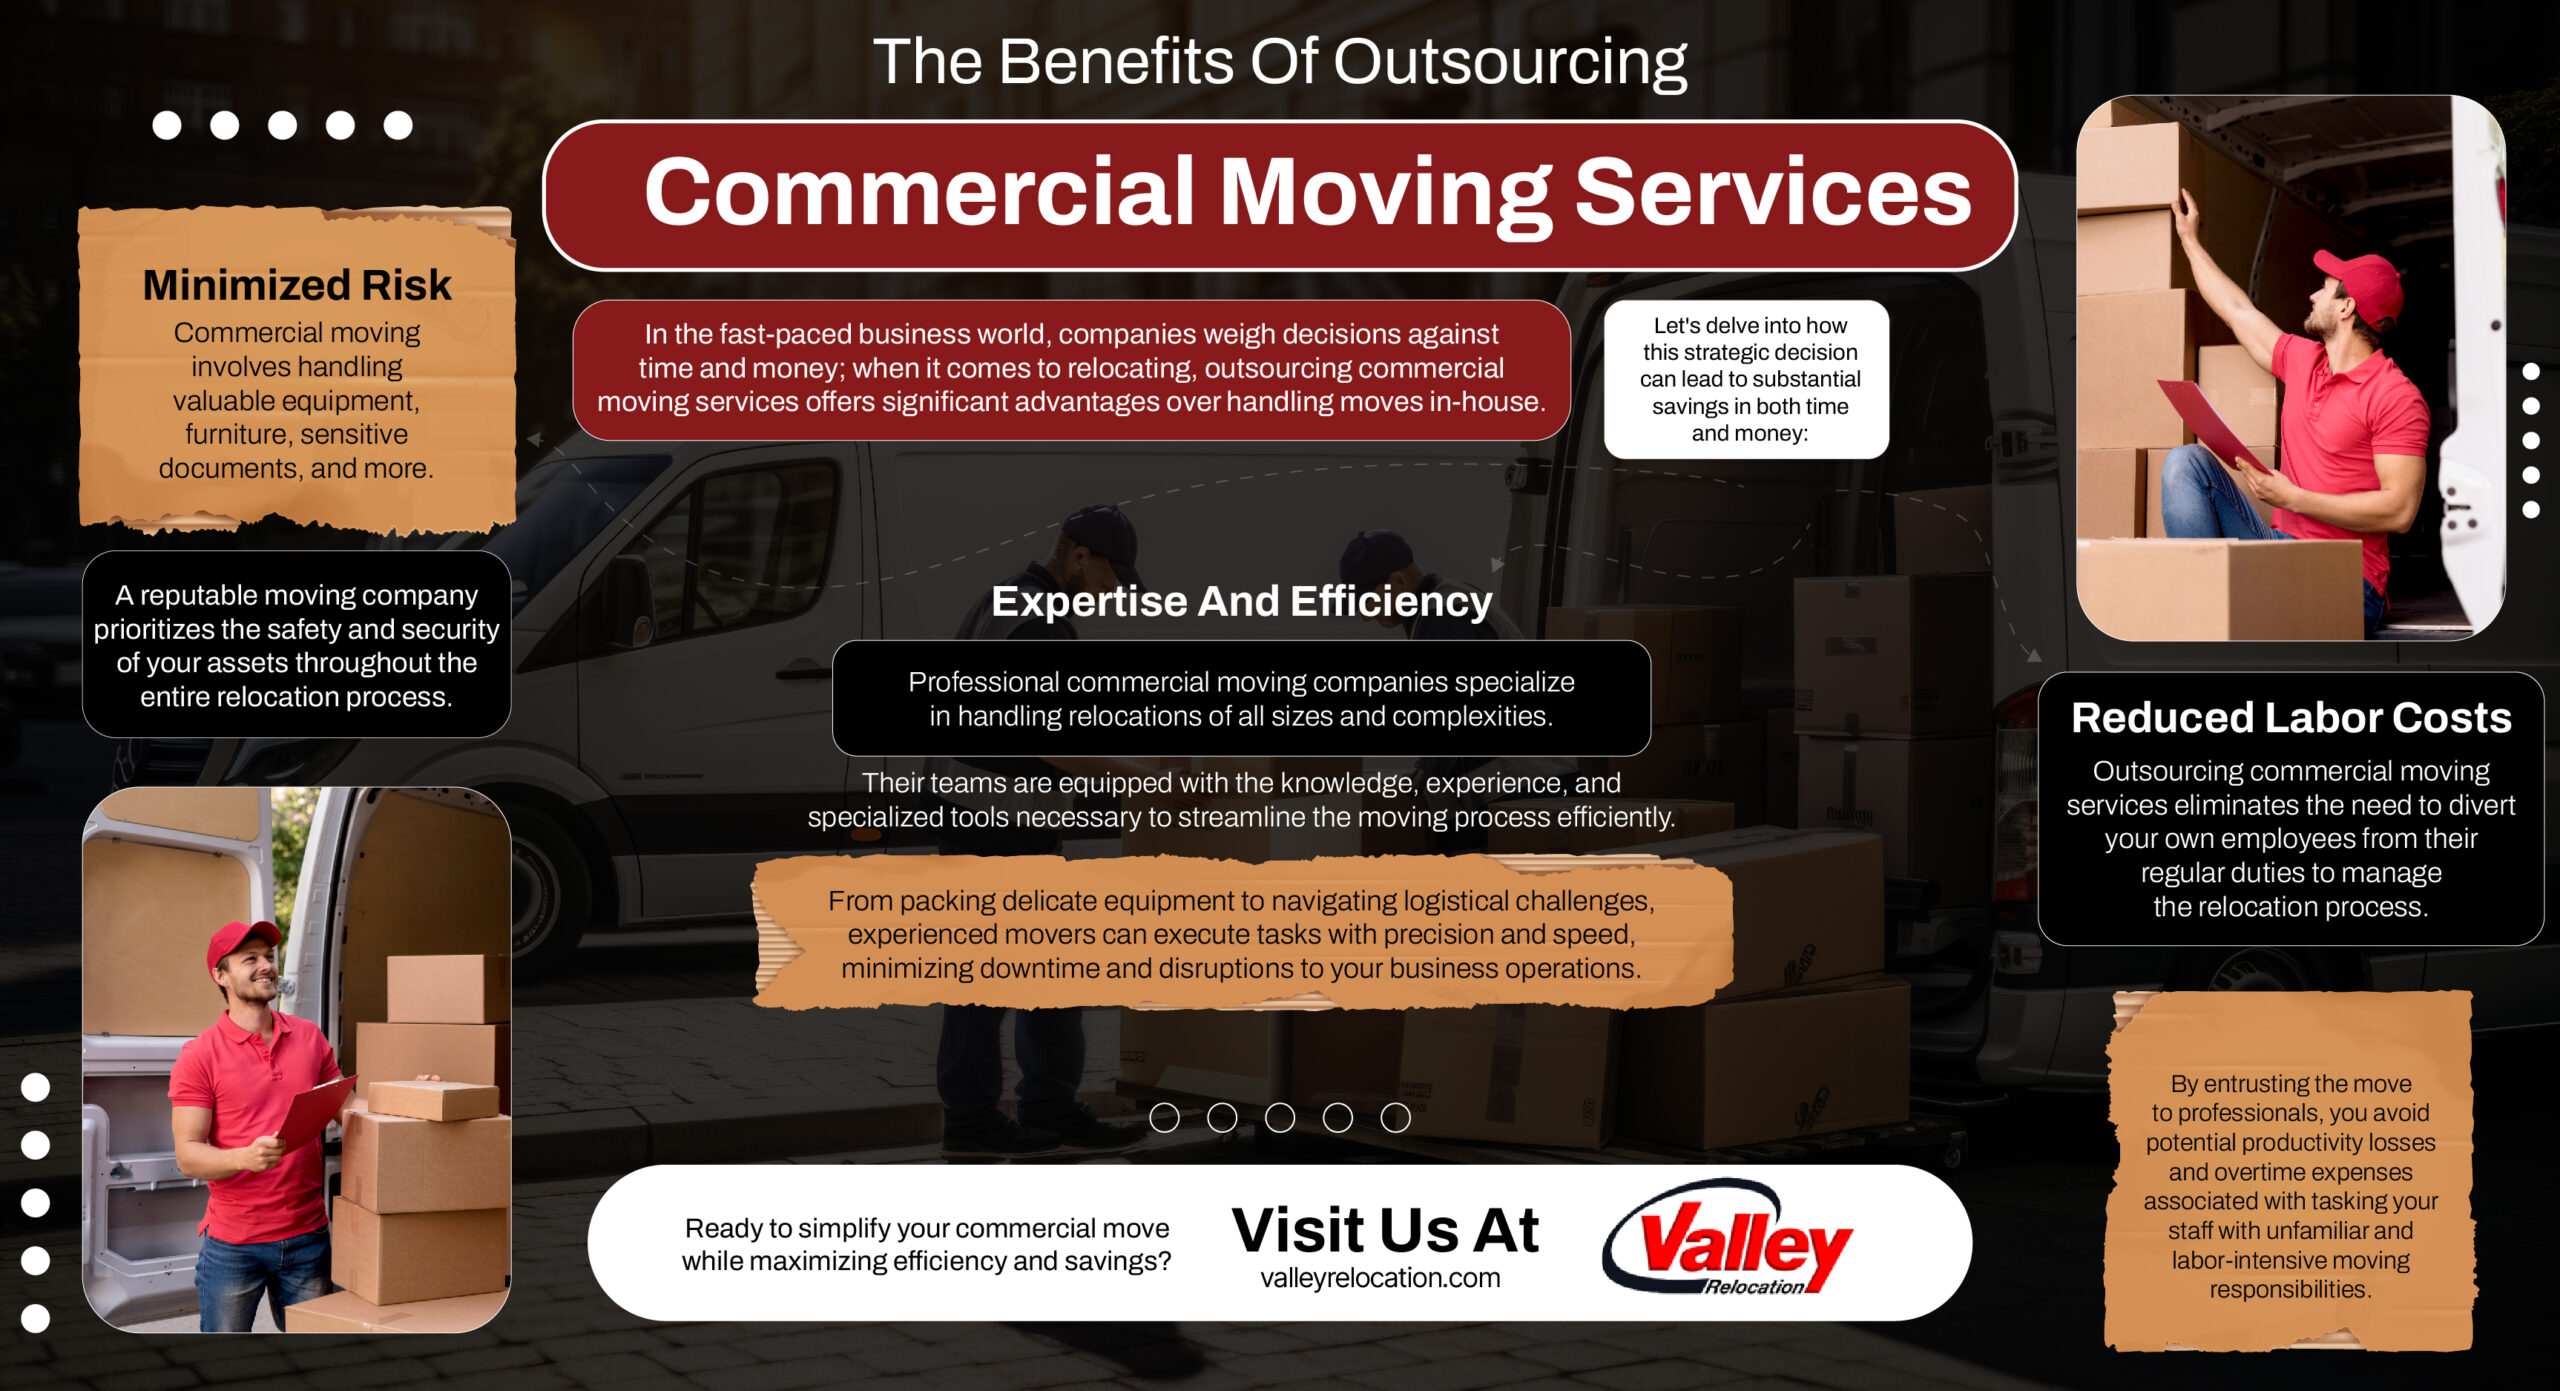 The Benefits Of Outsourcing Commercial Moving Services
